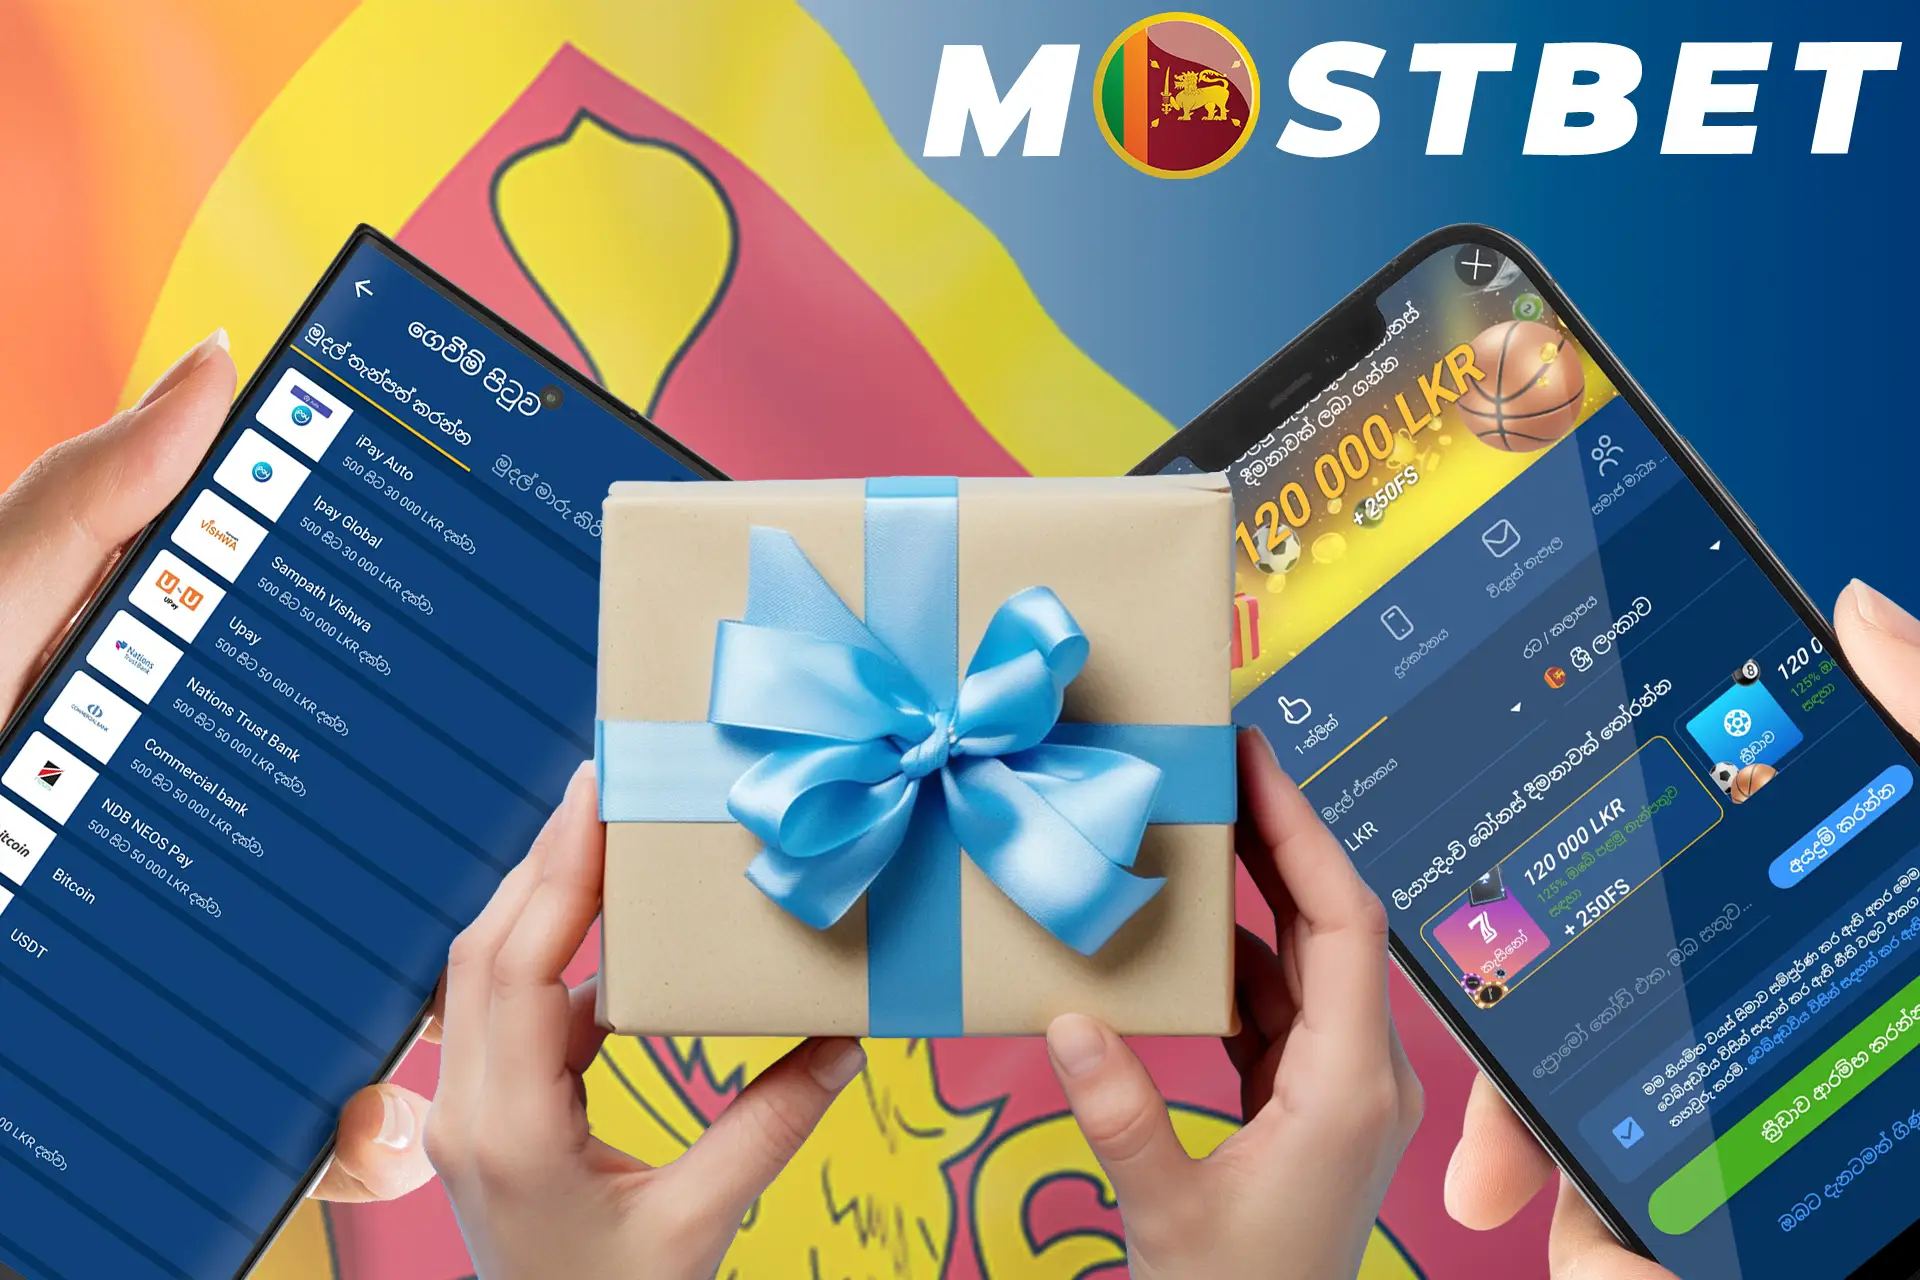 Find out how to get a welcome bonus at Mostbet Sri Lanka